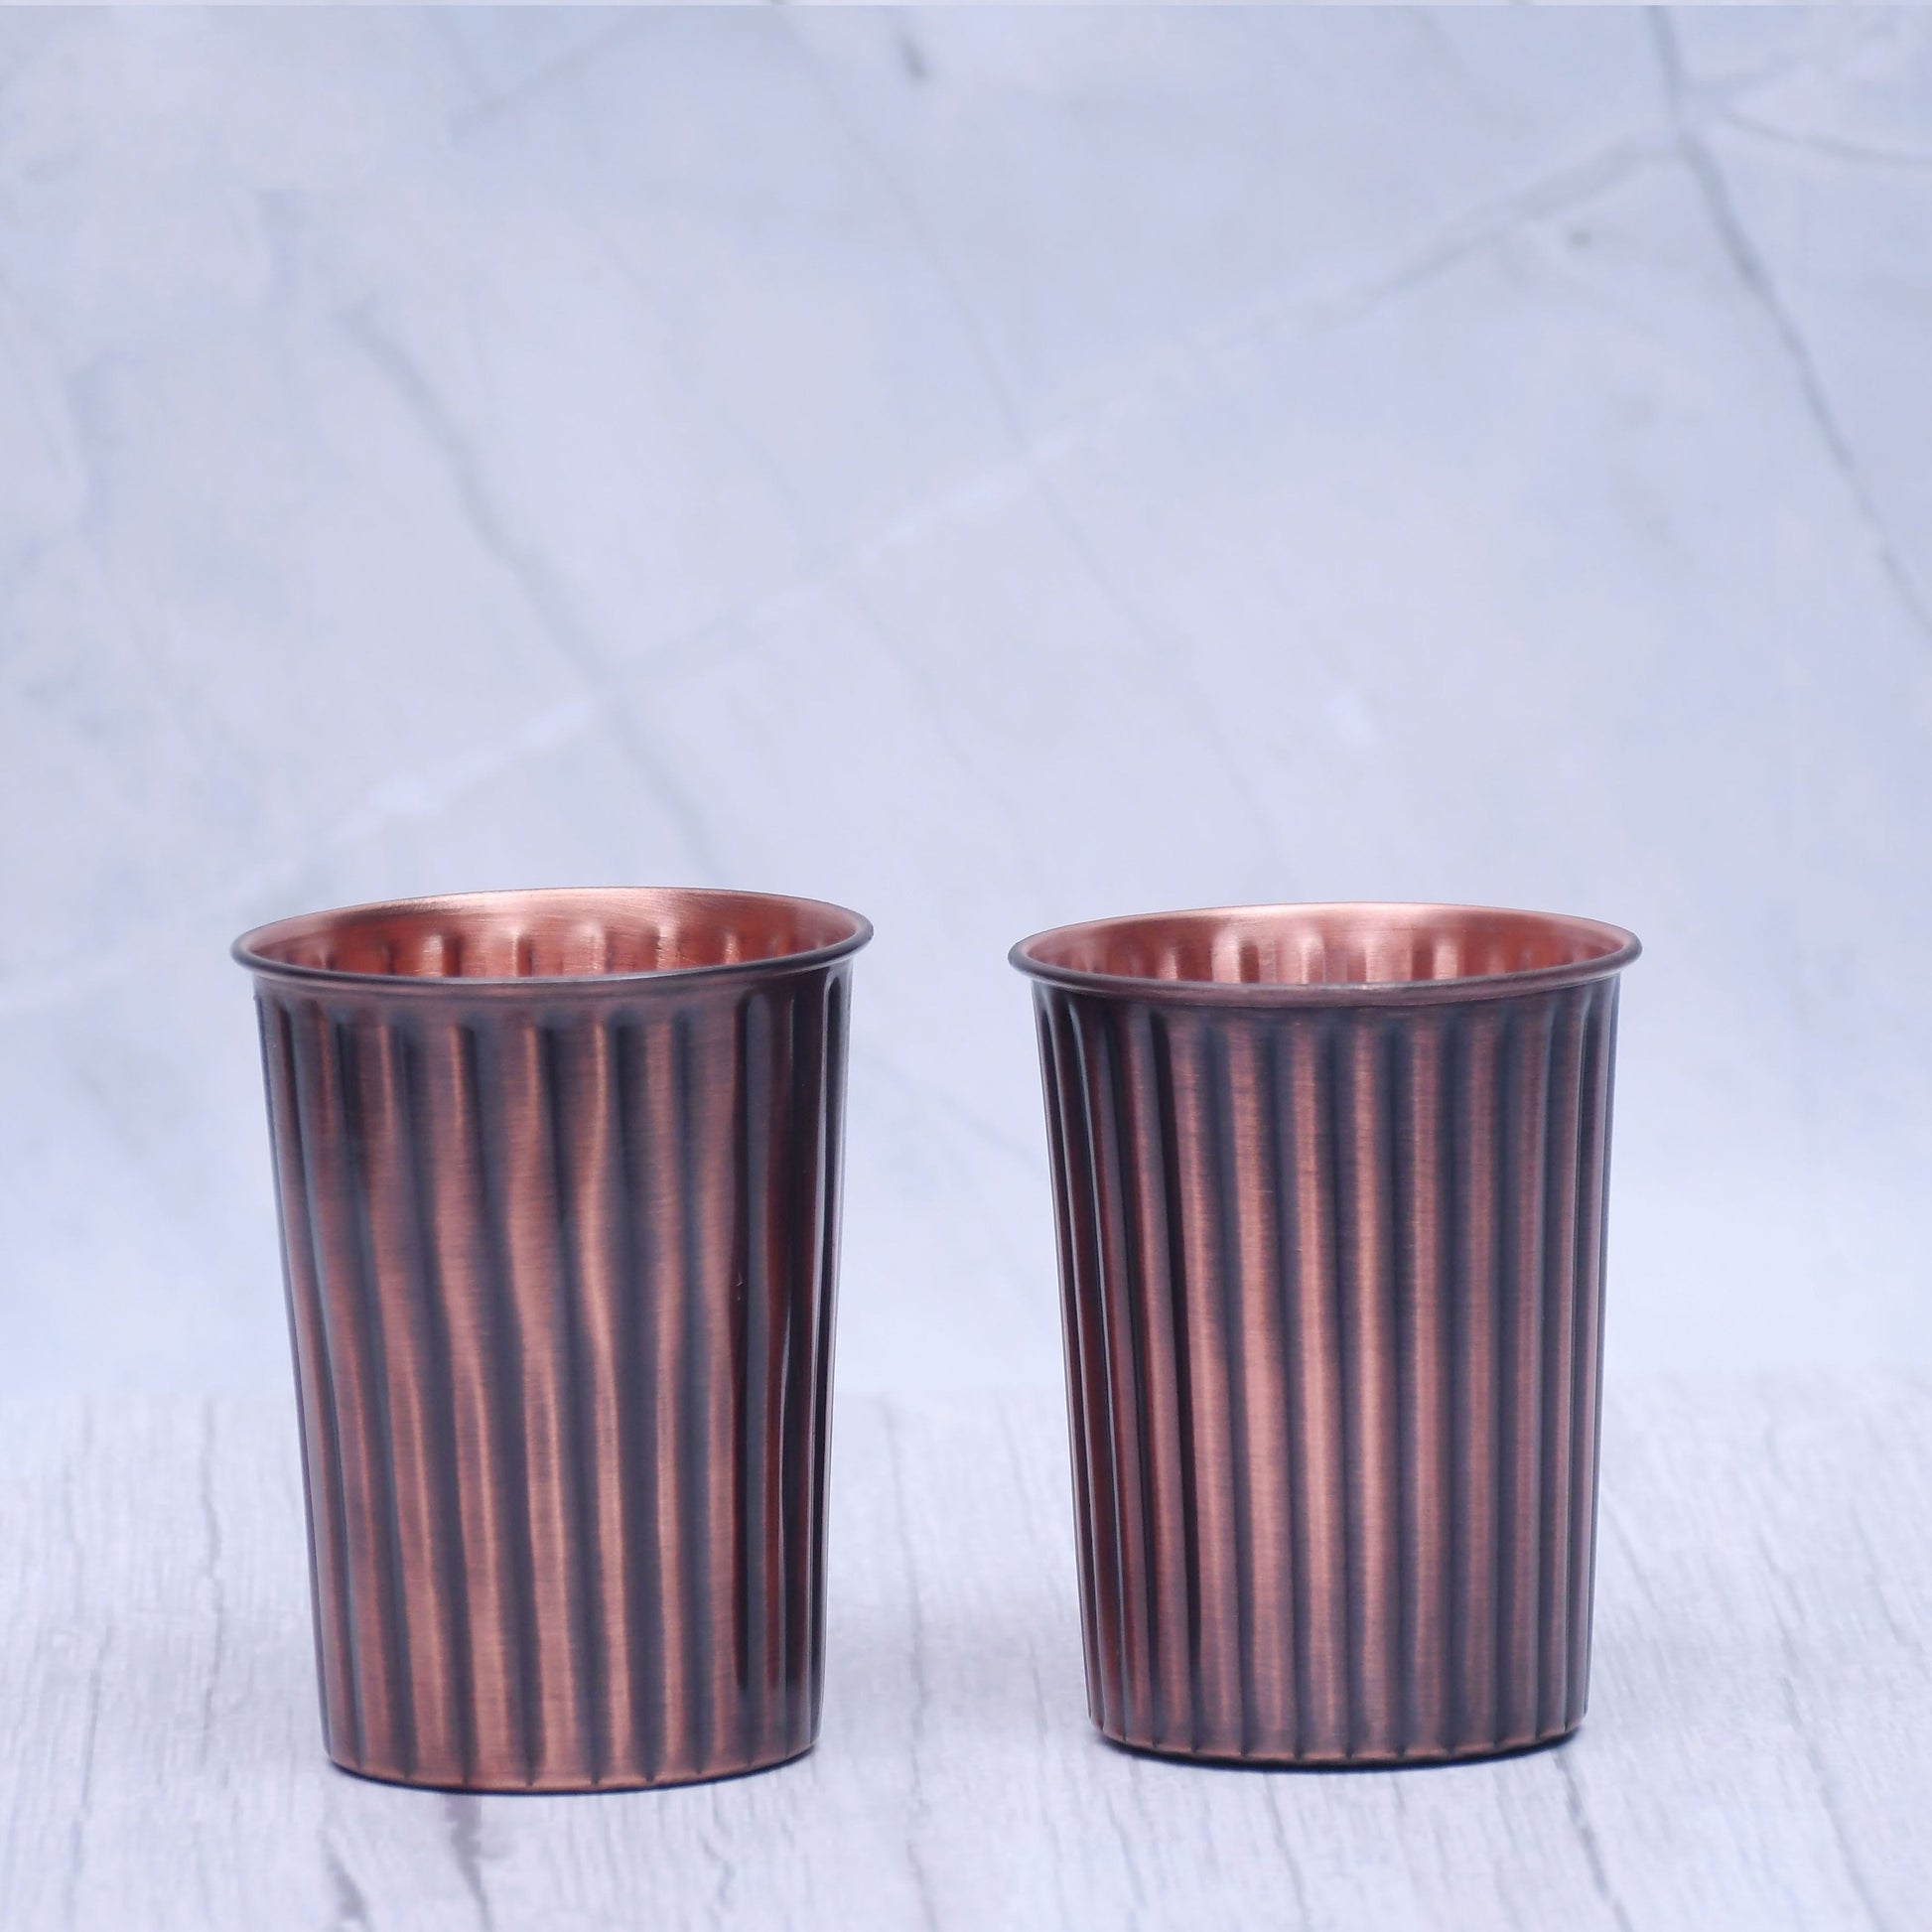 SAMA Homes - pure copper water glass set of 2 antique rope design tumbler capacity 300ml